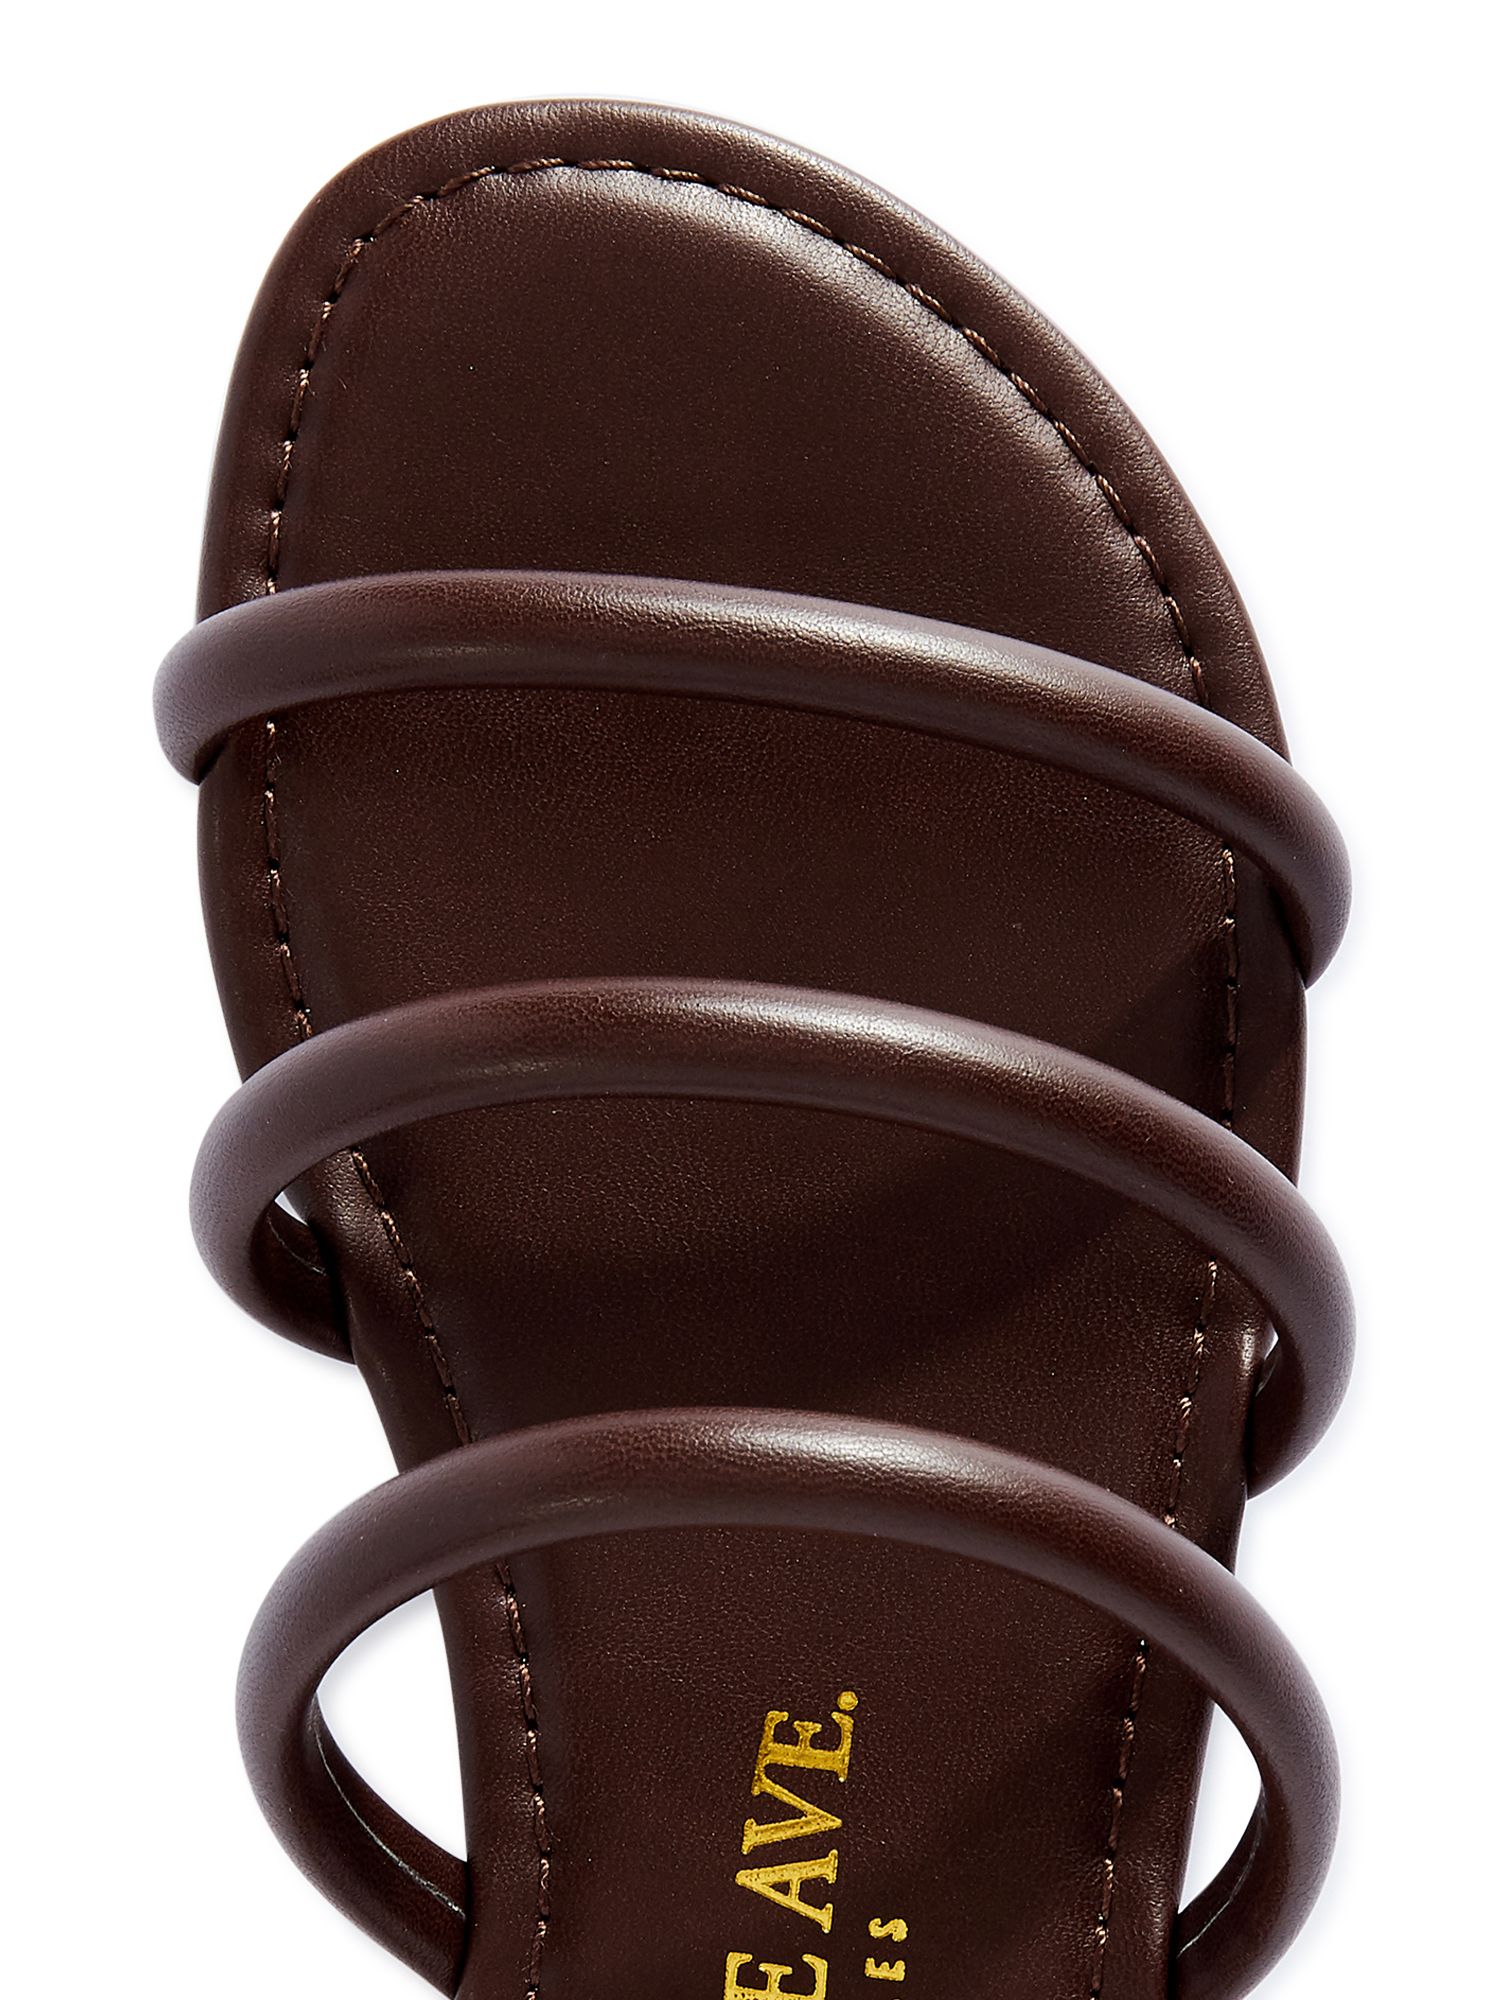 Melrose Ave Women's Faux Leather Three Strap Slide Sandals - image 4 of 6